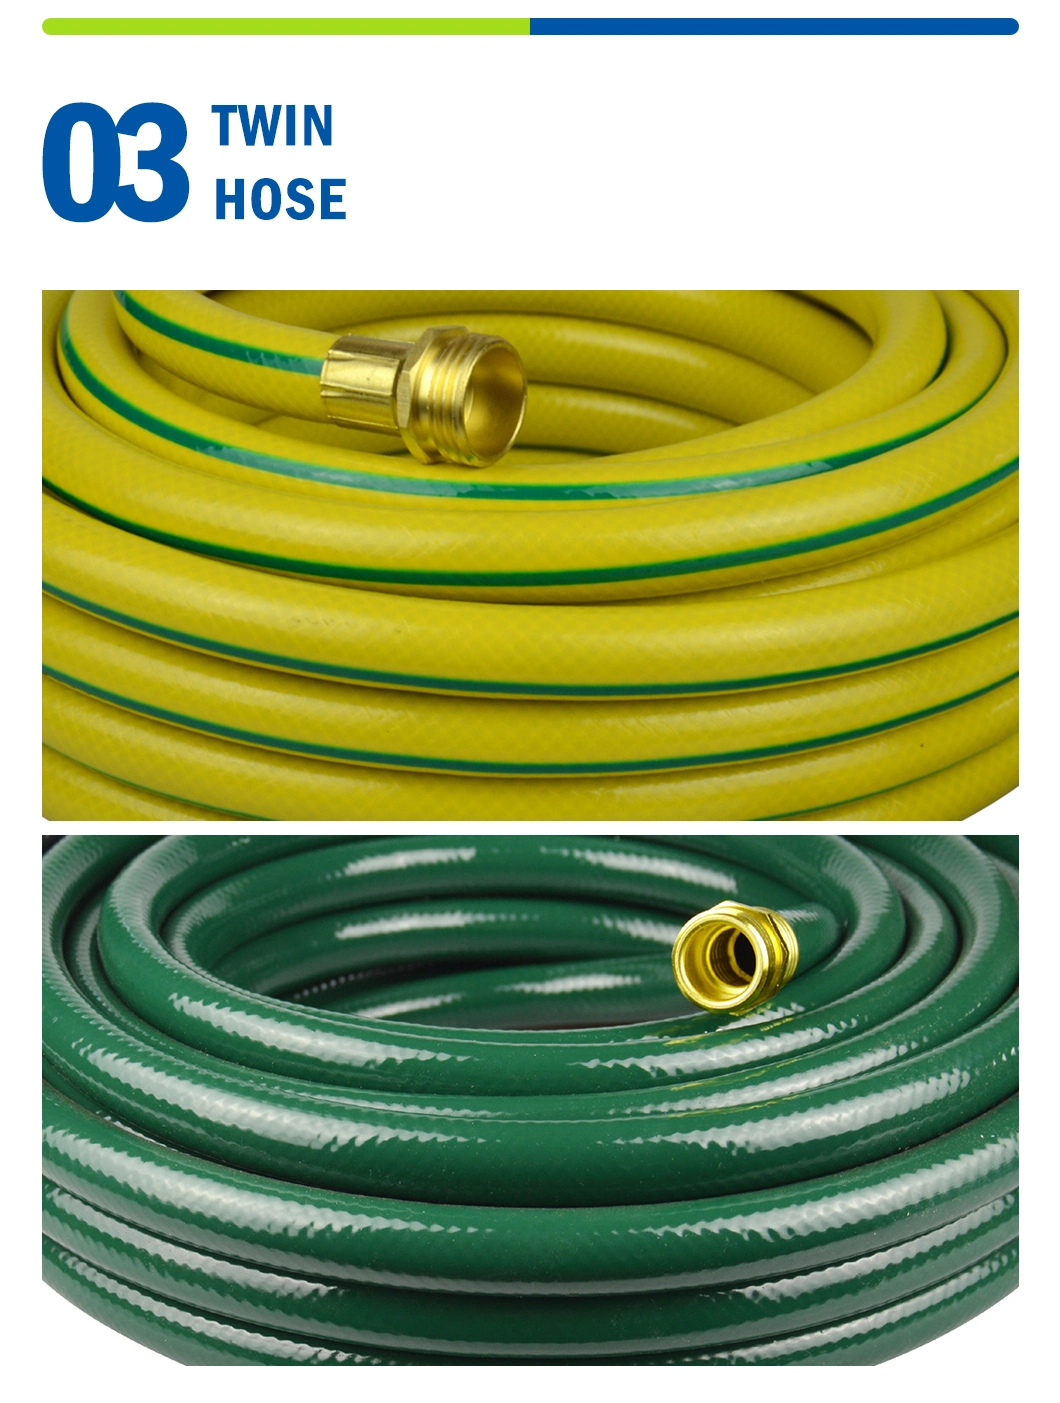 1/2" 12mm Flexible Water PVC Garden Hose with Fittings